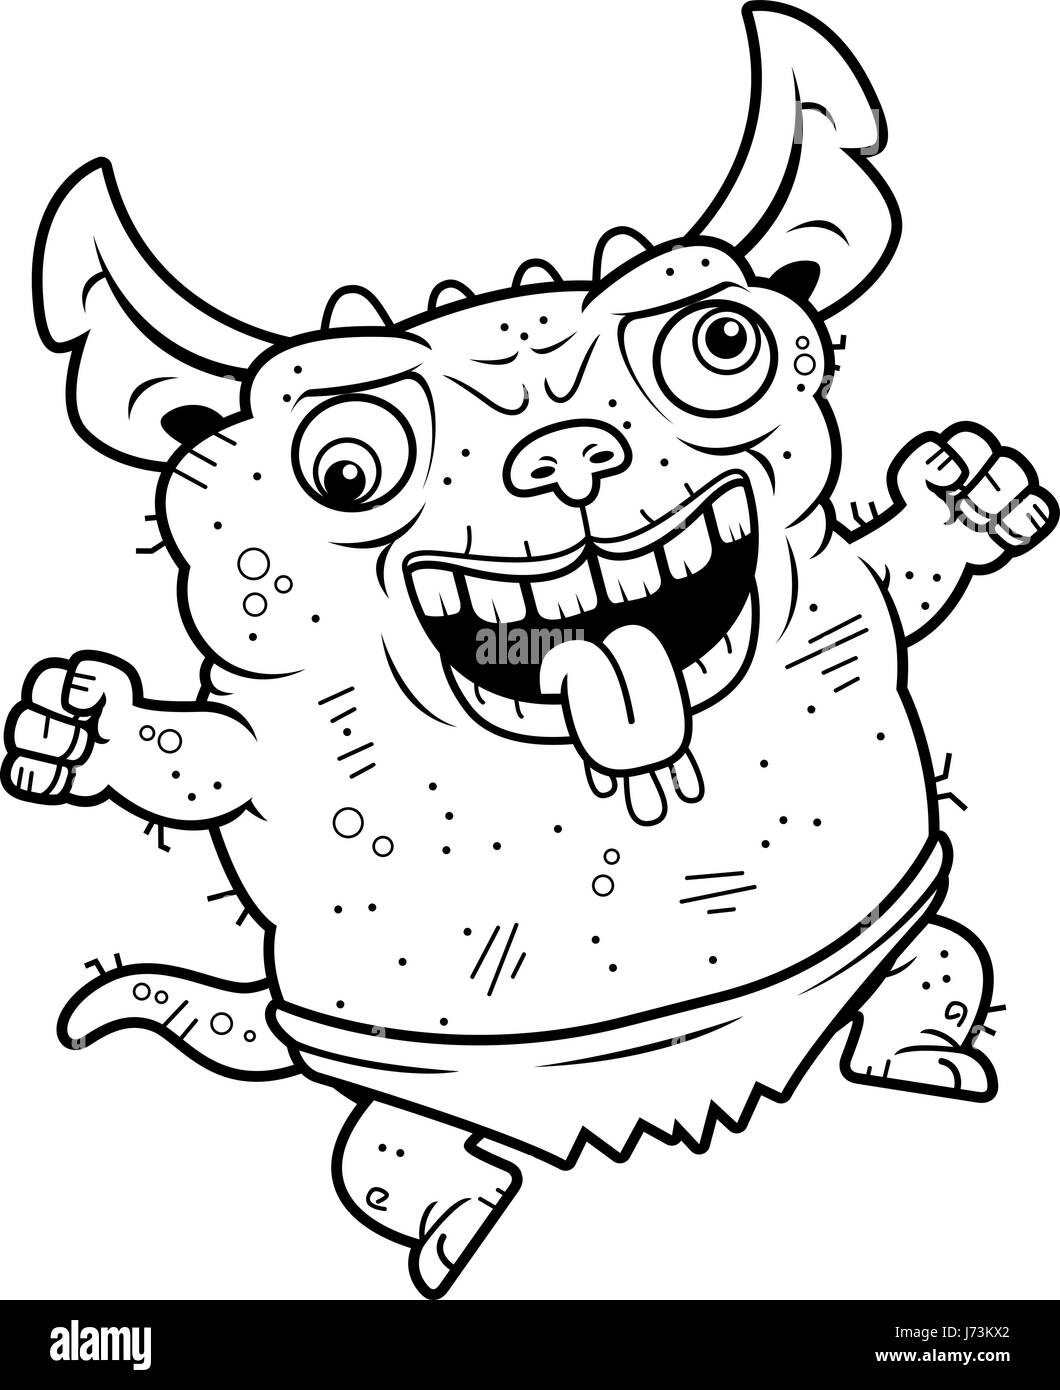 A cartoon illustration of an ugly gremlin looking crazy. Stock Vector